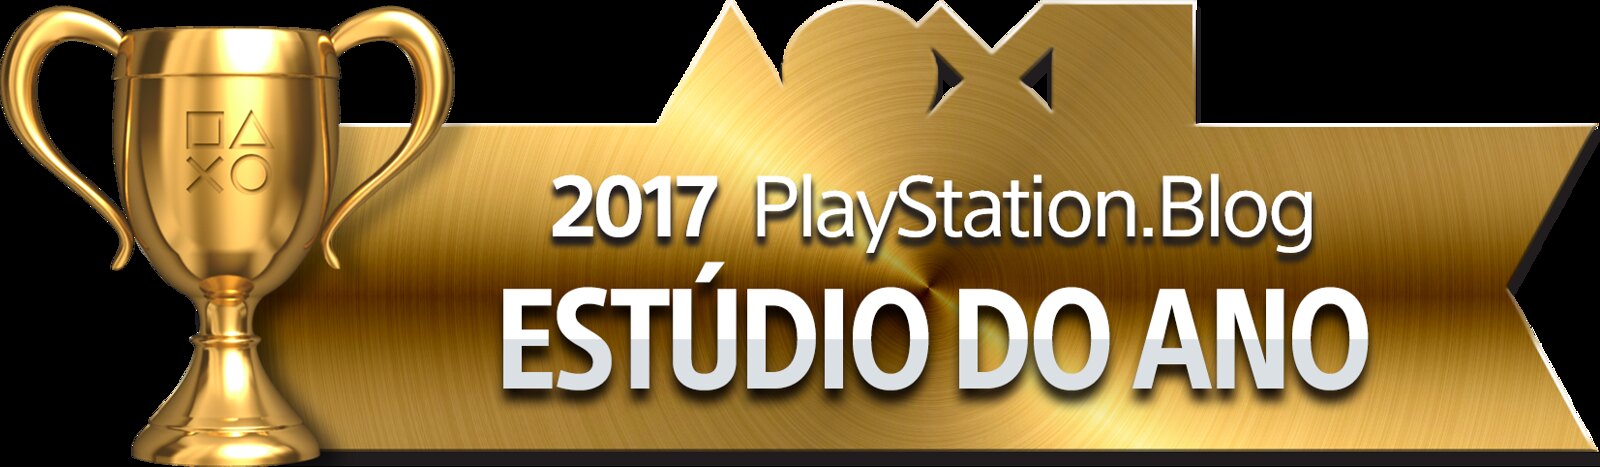 PlayStation Blog Game of the Year 2017 - Studio of the Year (Gold)